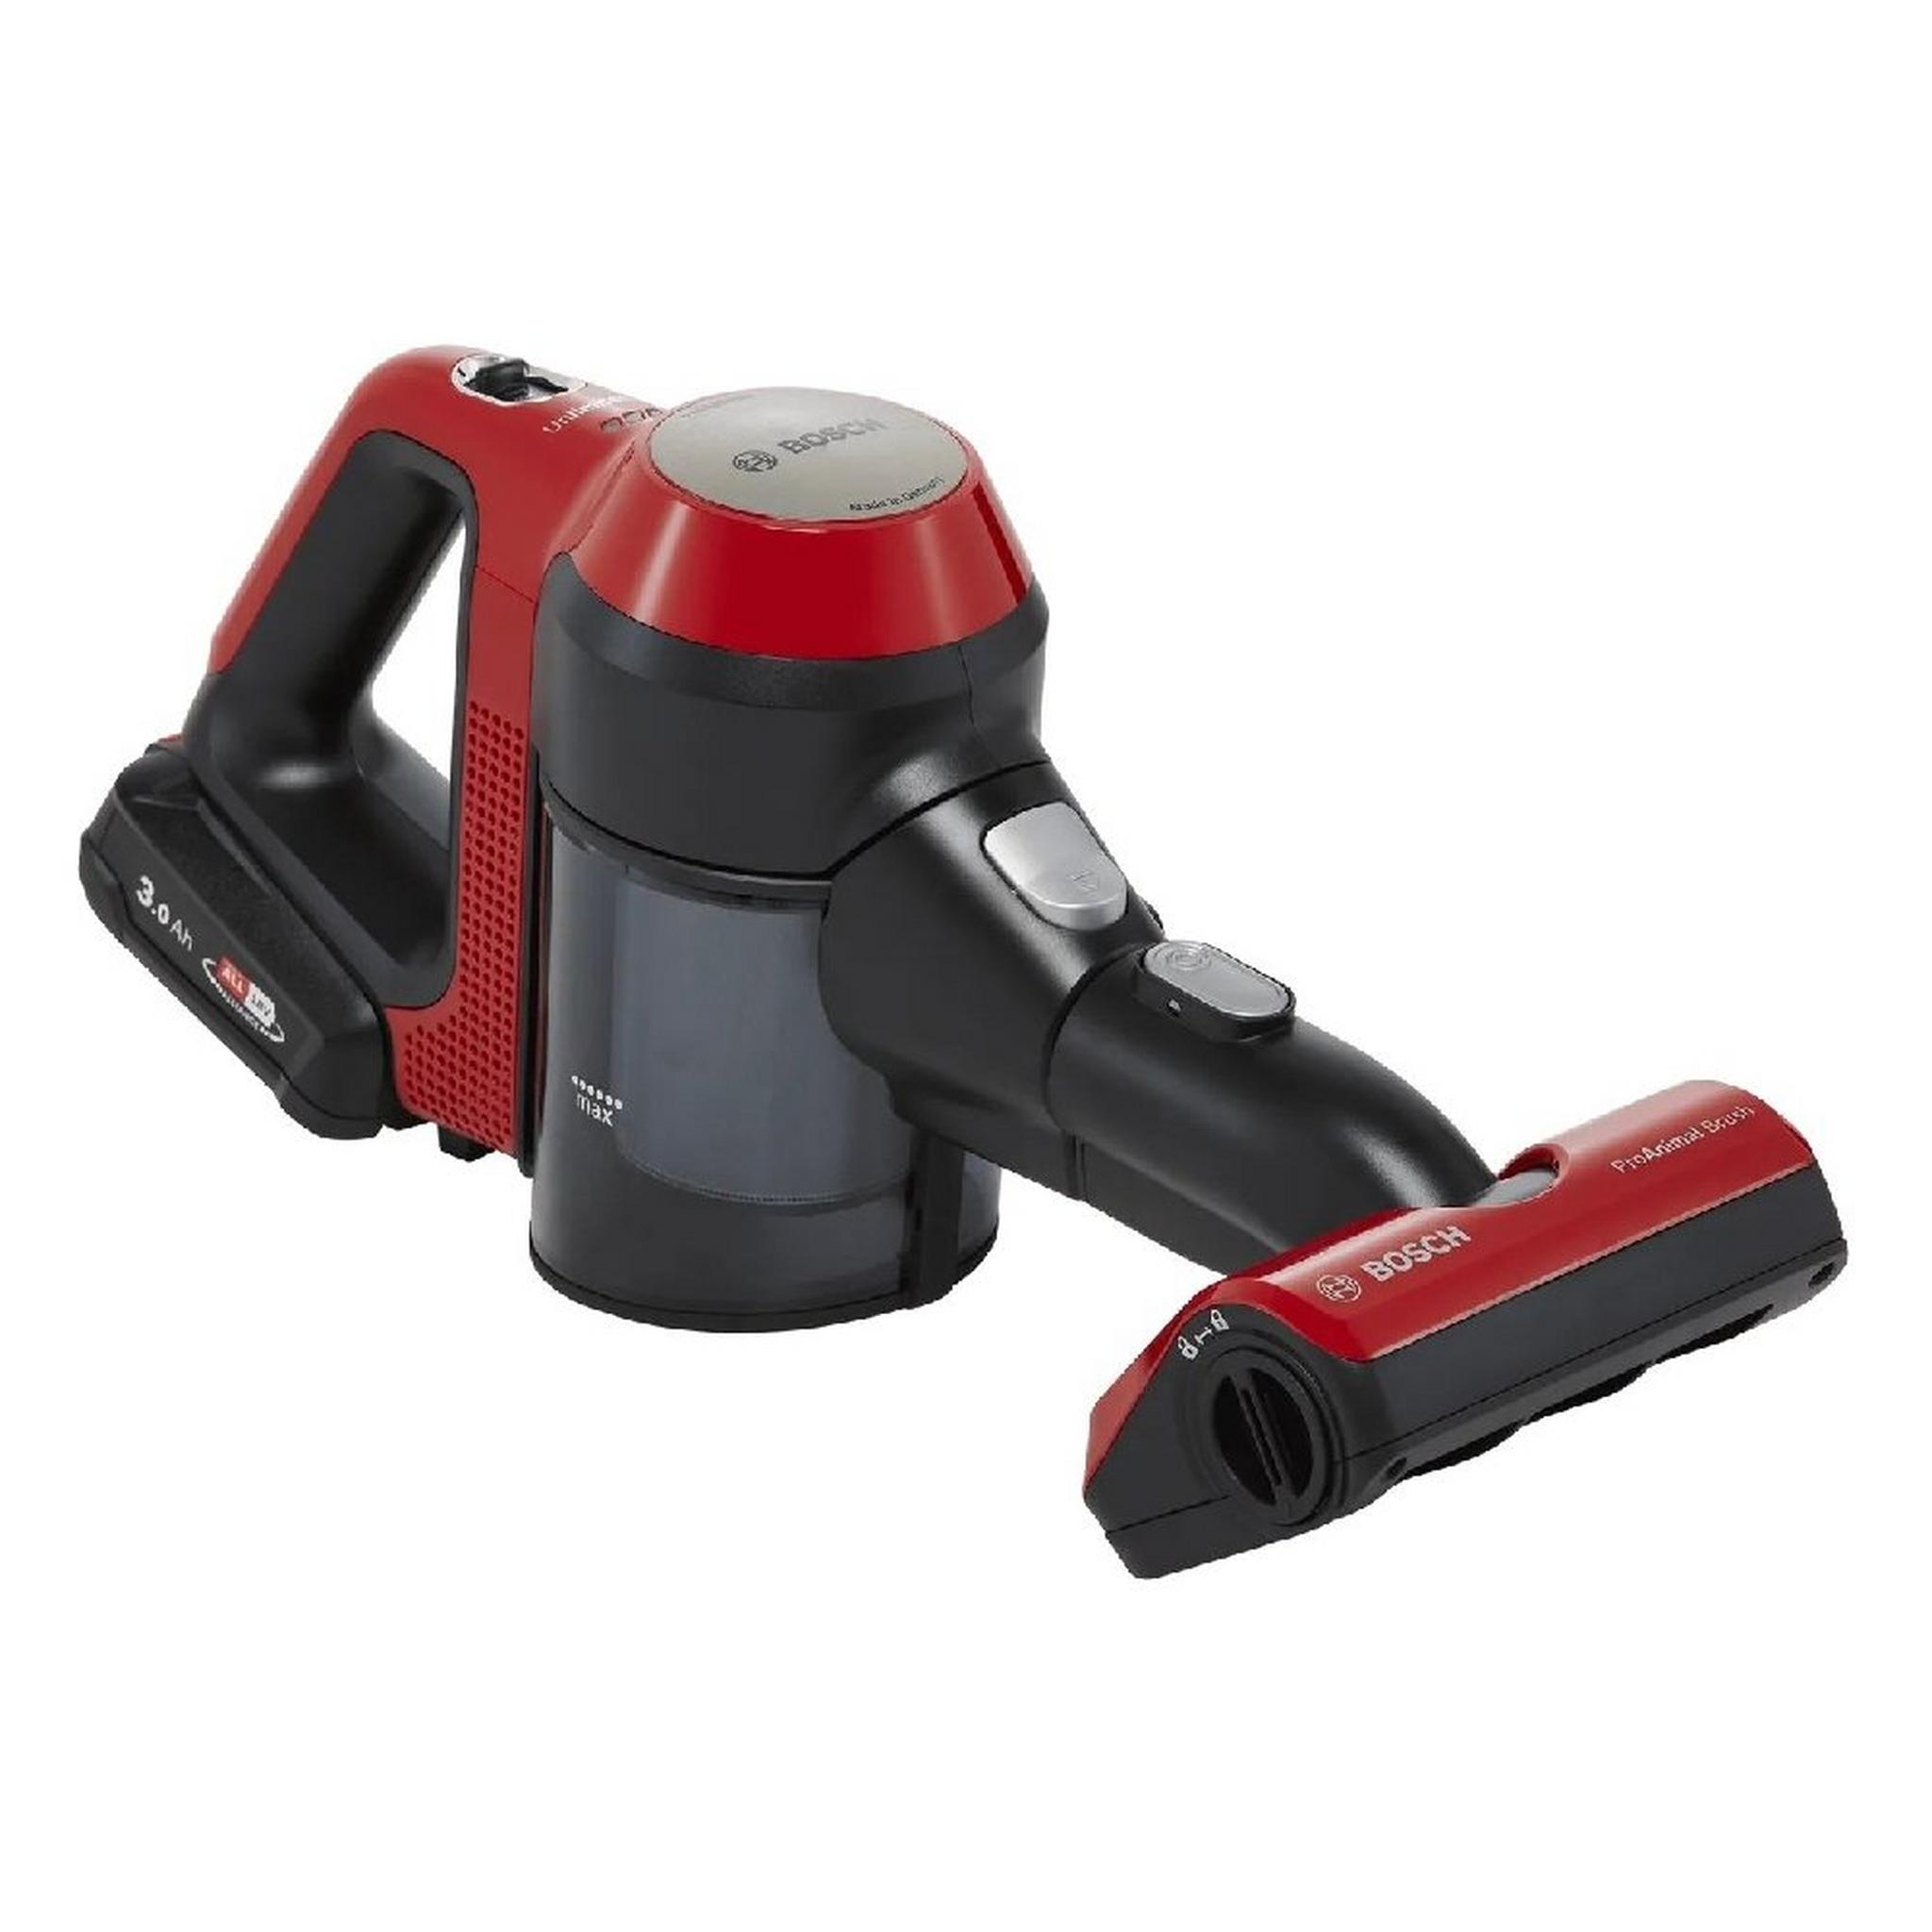 BOSCH Unlimited 7 Cordless Vacuum Cleaner, 400 Watts, 0.3 Liters, BCS71PETGB - Red